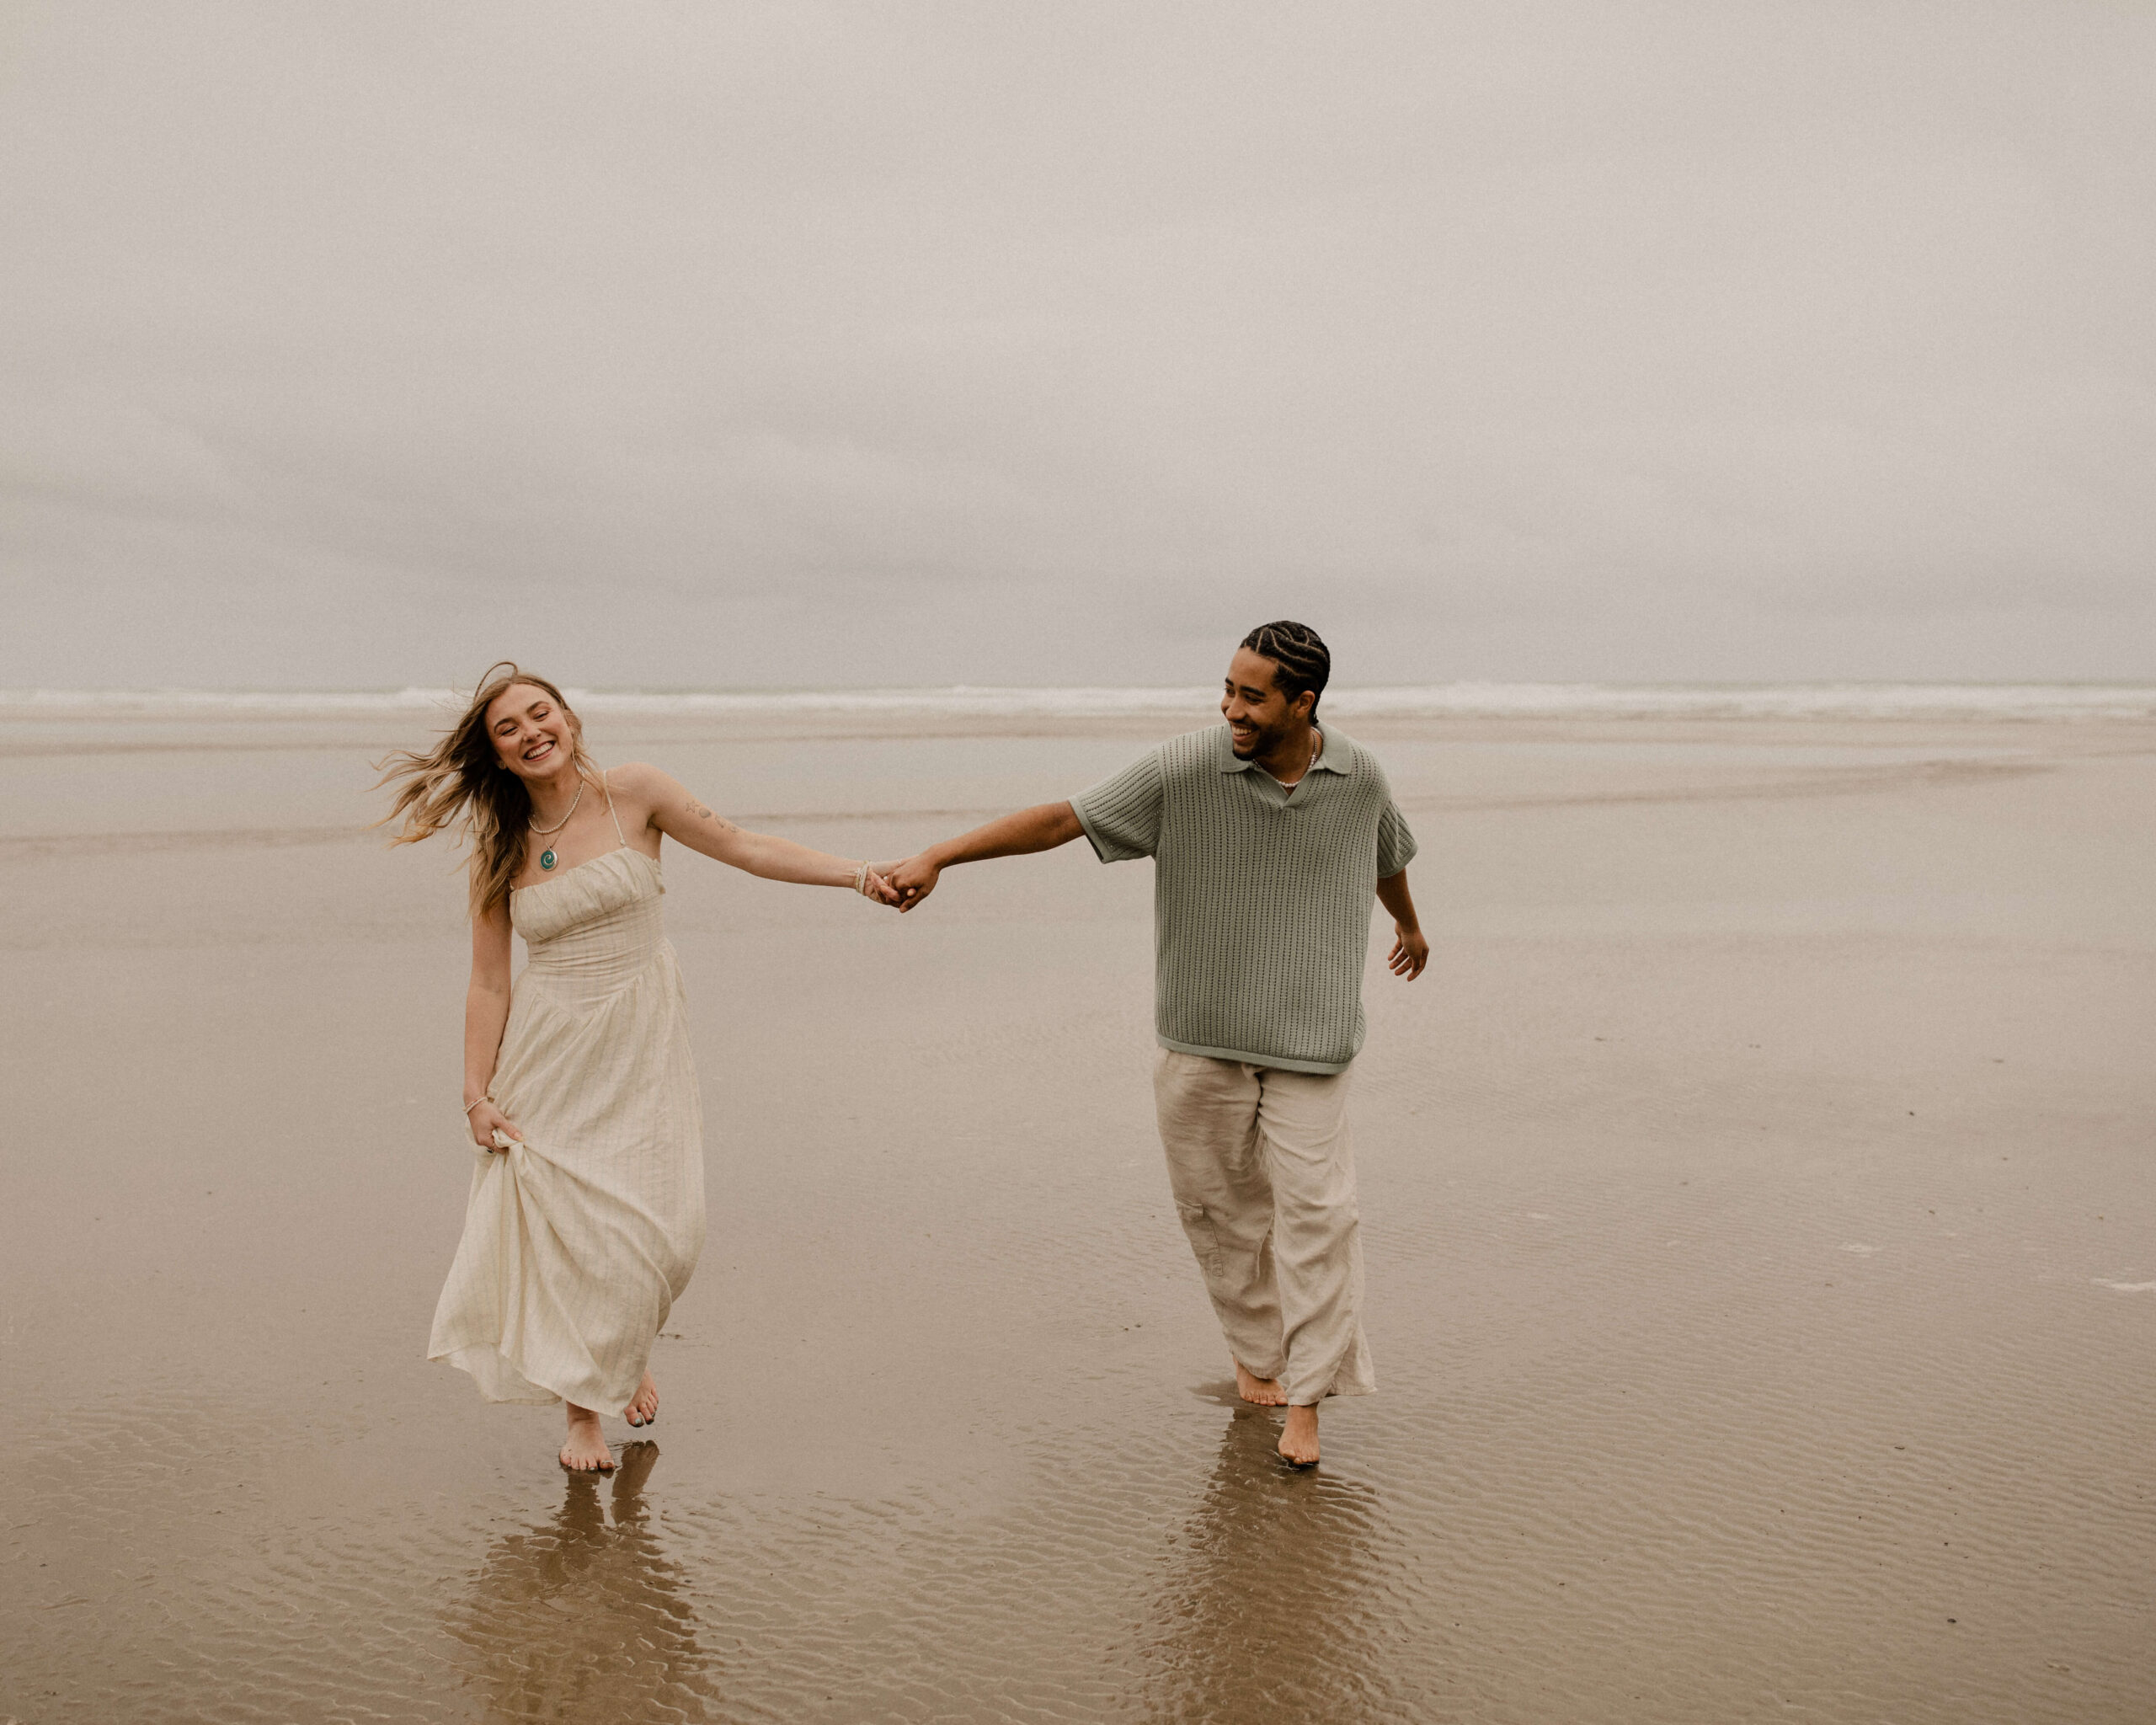 Oregon coast couples session shot by Ronny and Rene.